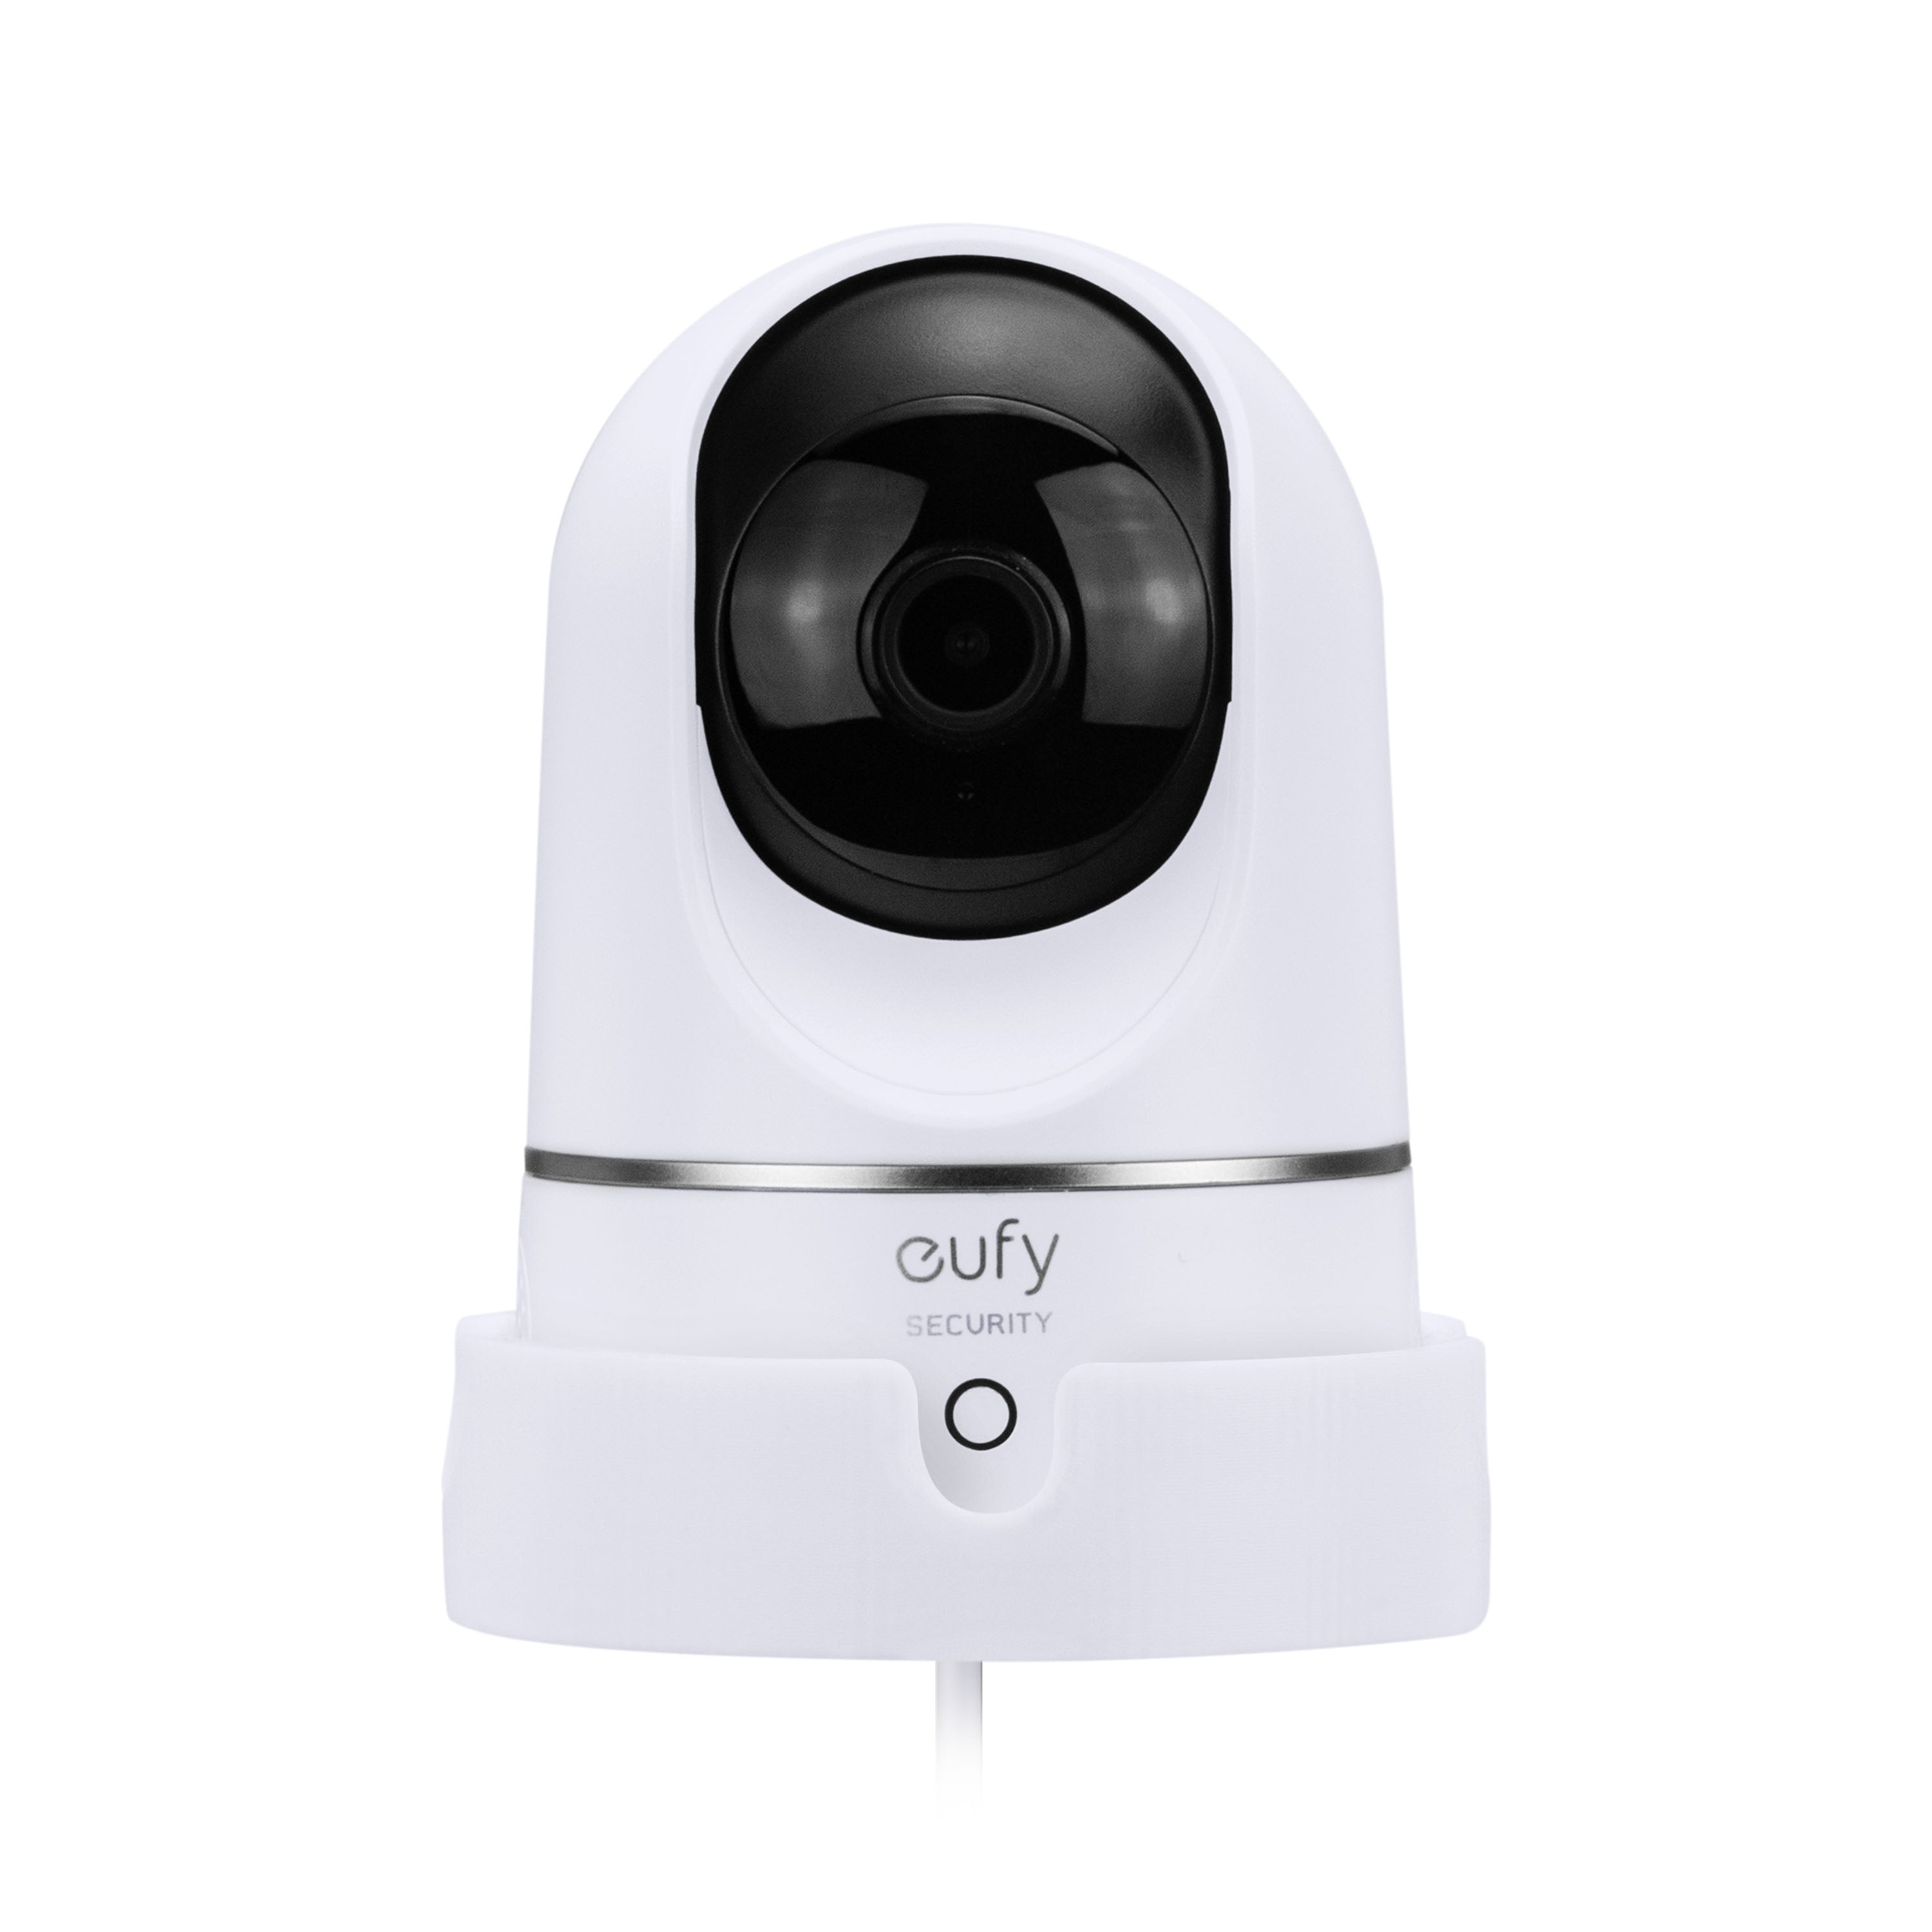 How to Install Eufy Security Camera: Step-by-Step Guide